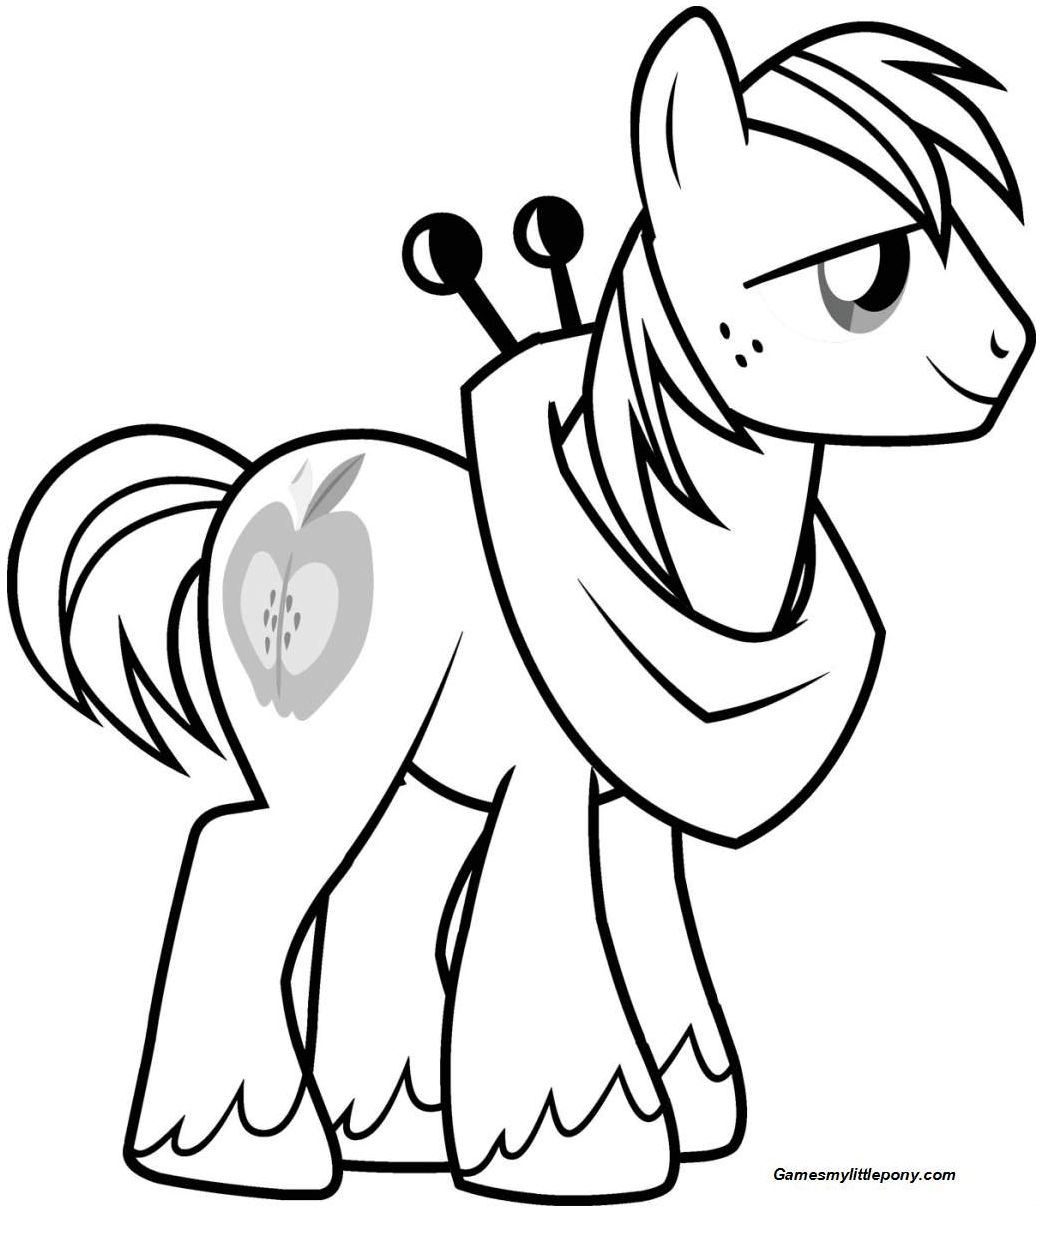 My Cute Horse Coloring Page